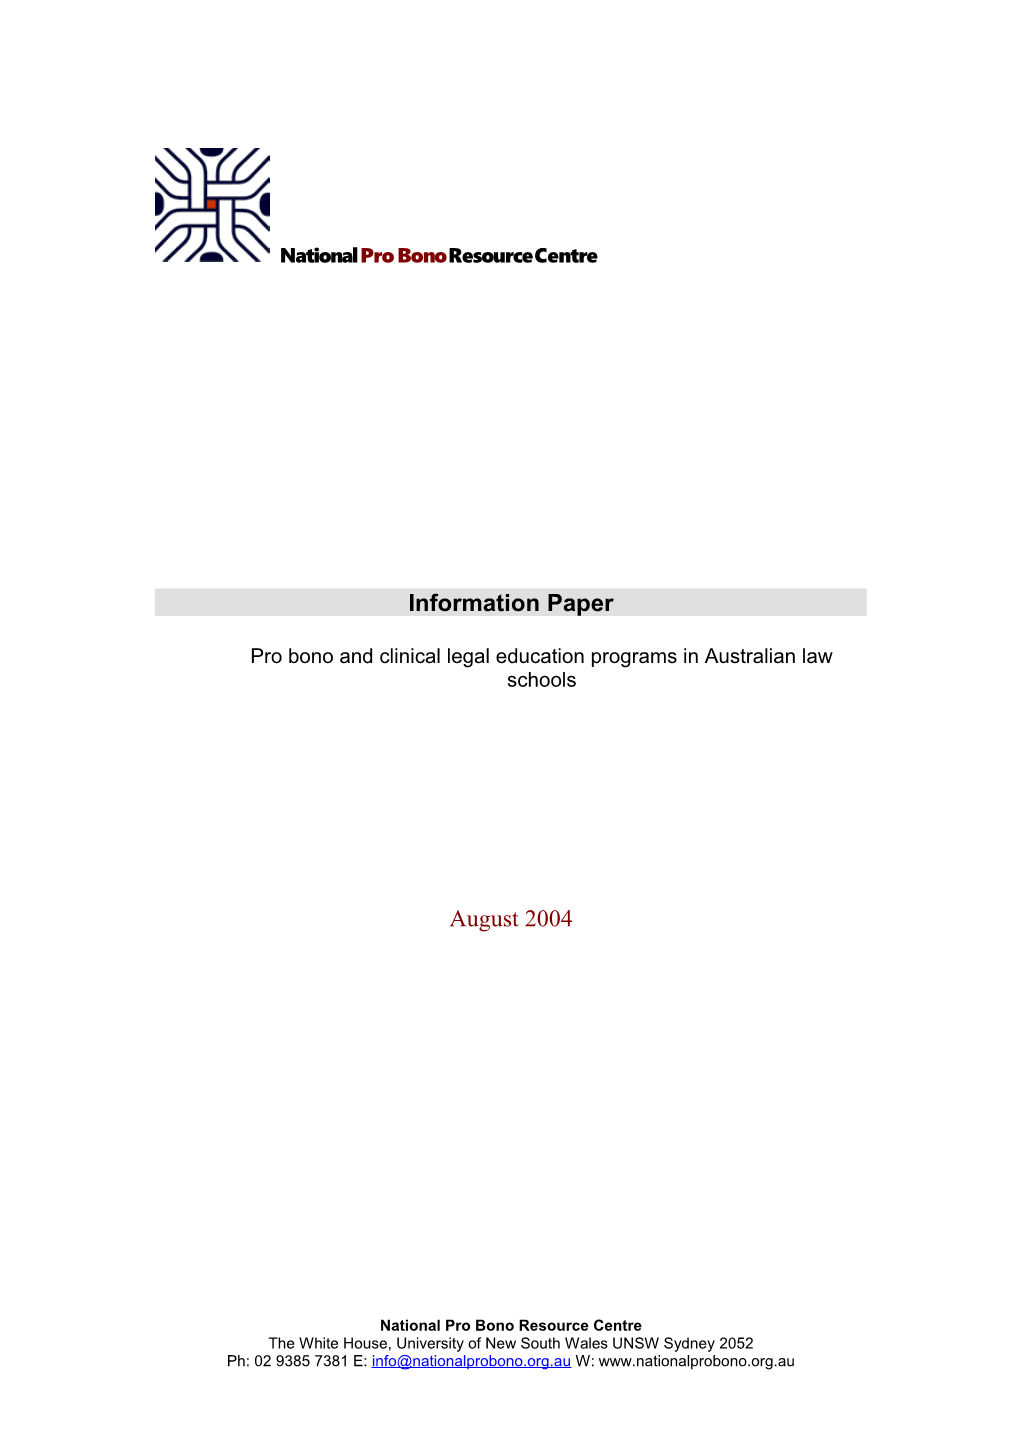 (Draft) Information Paper: Pro Bono and Clinical Legal Education Programs in Australian